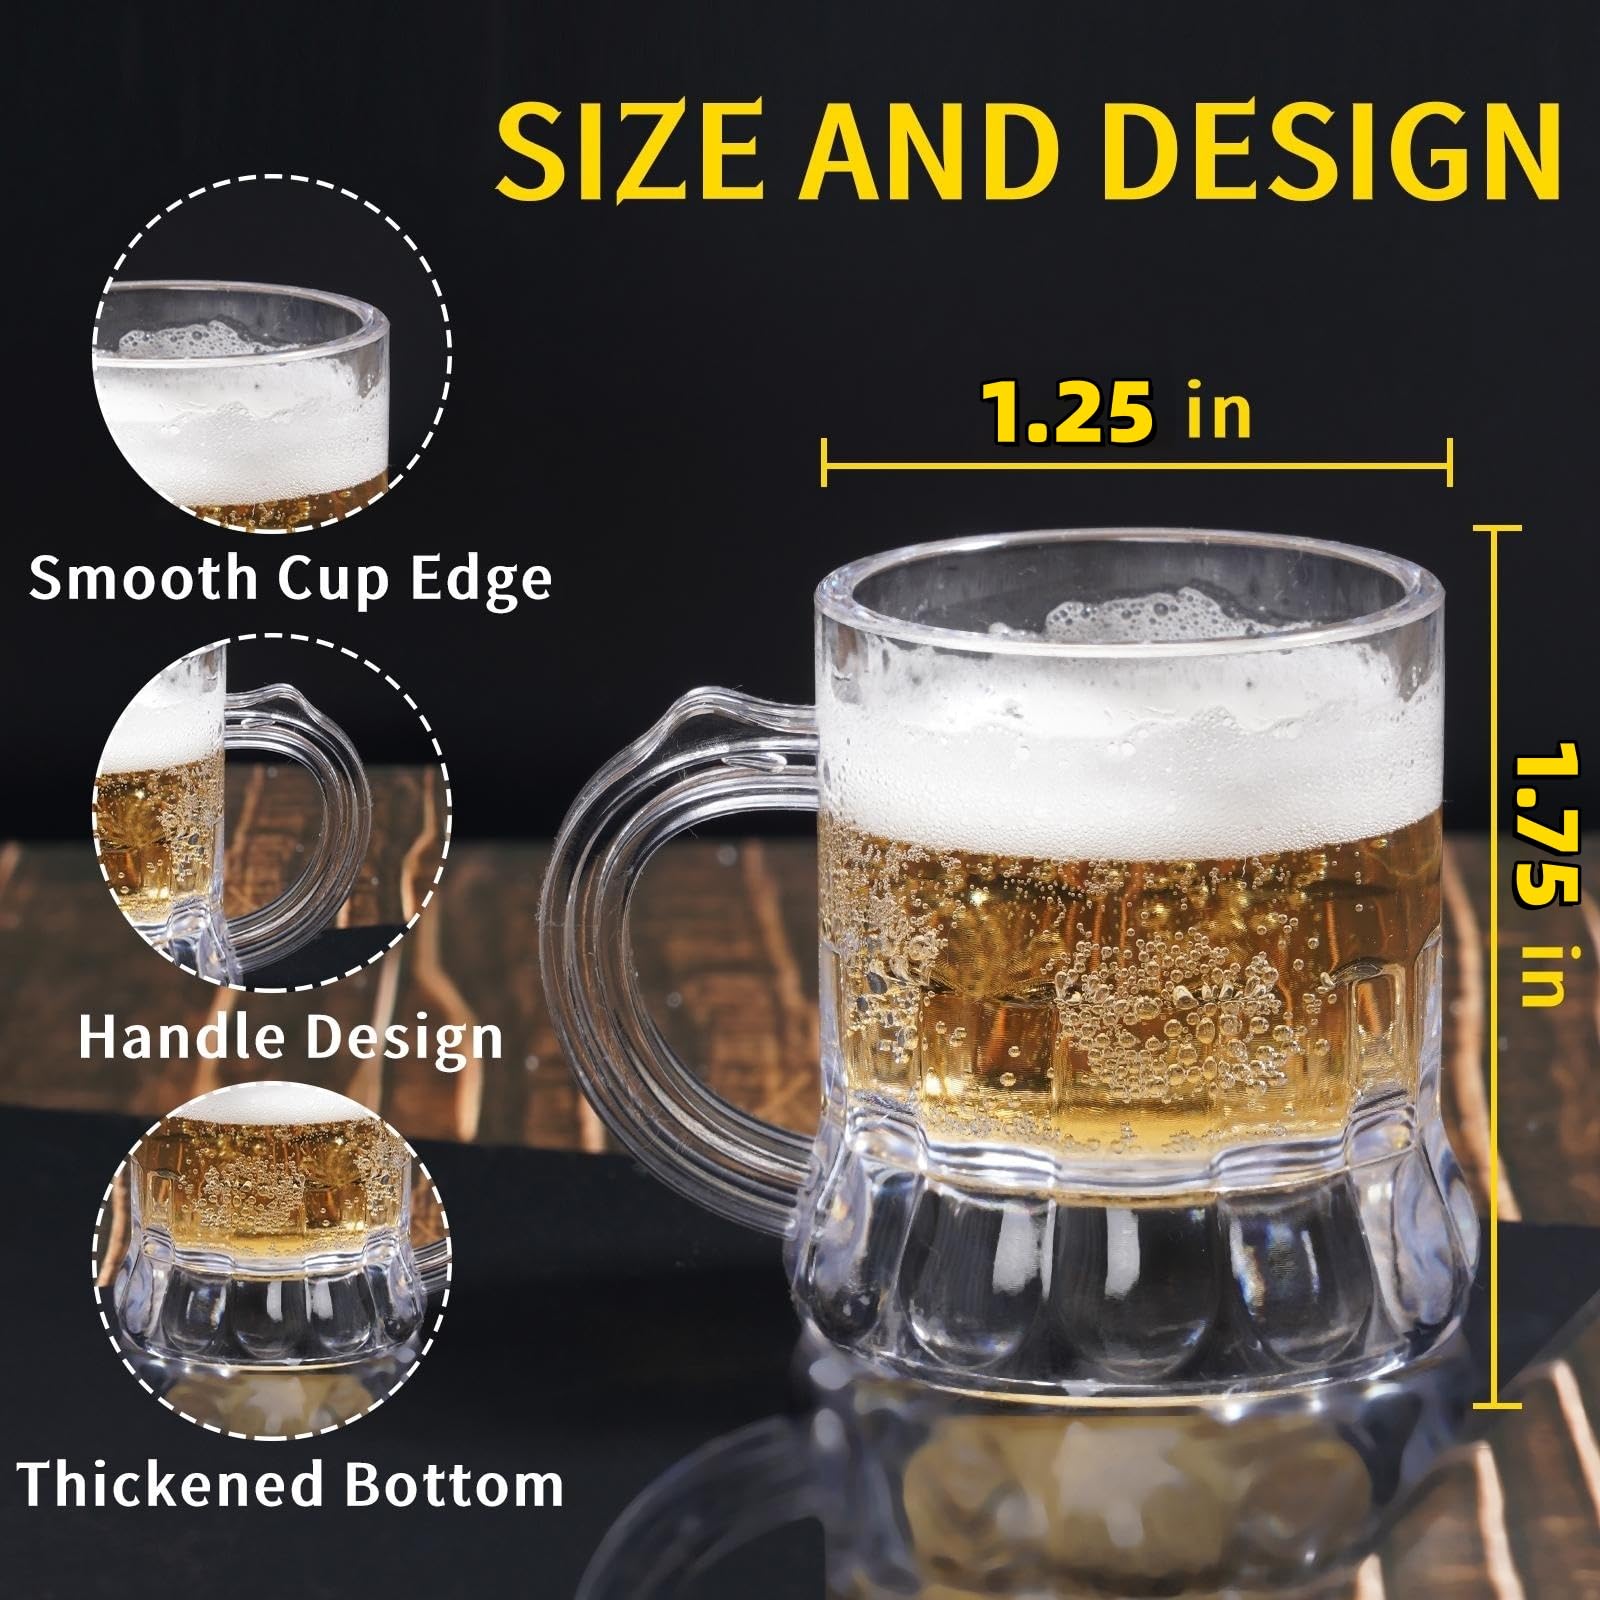 YAXINRUI Mini Beer Mug Shot Glasses, 1 oz Beer Shot Glasses Plastic Beer Mug Shot Beer Tasting Glasses for Beer Fest, Birthday Weddings Party Supplies, BBQ and Picnics (1.75'' Tall, 12 Pieces)